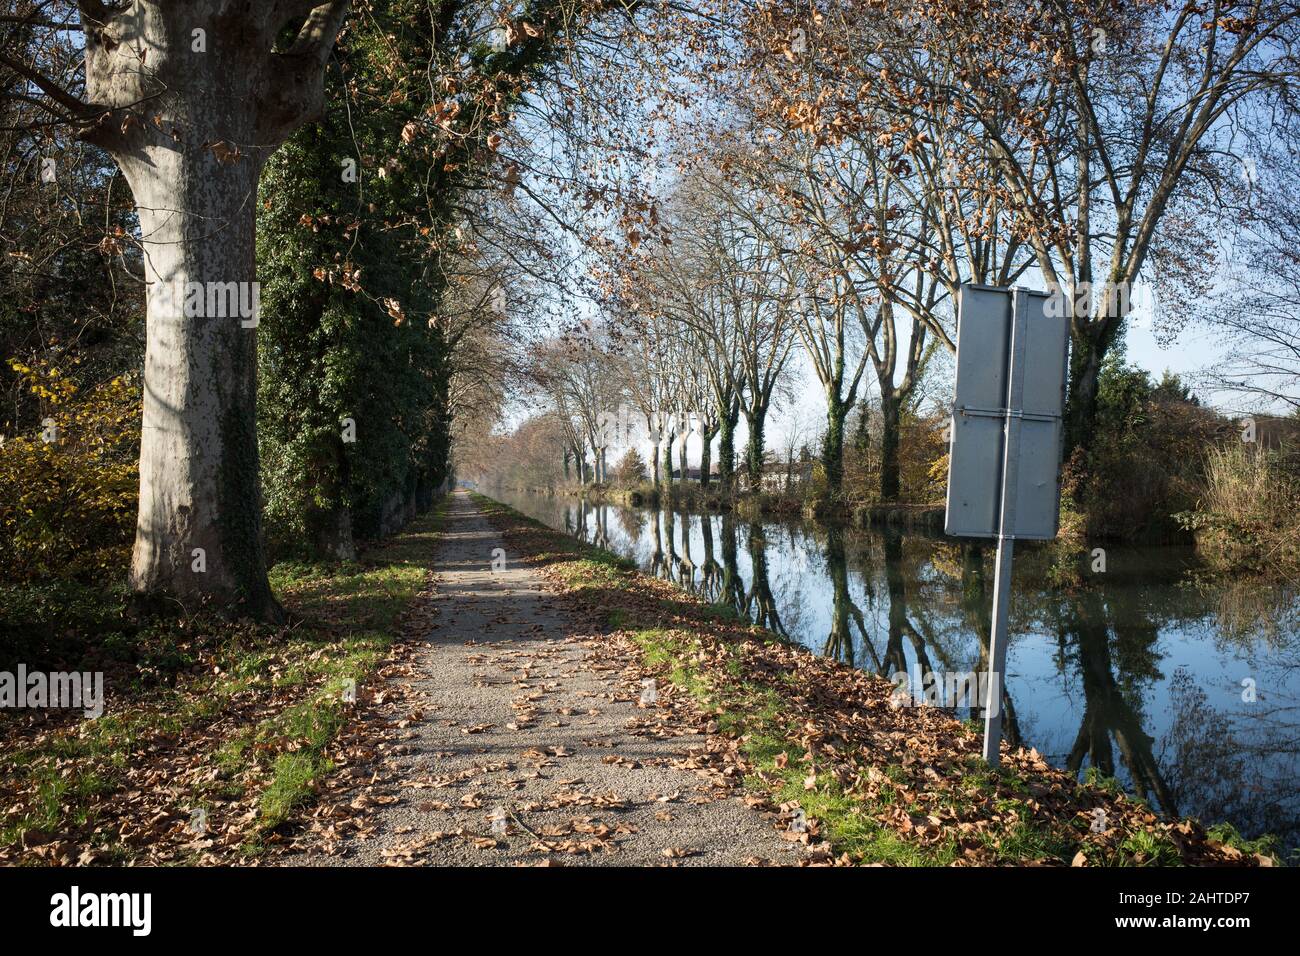 CANAL LATÉRAL À LA GARONNE - CANAL LINED BY AN ALLEY OF POPLARS - FRENCH CANAL -CANAL LANDSCAPE  IN AUTUMN SEASON -  LOT ET GARONNE - AQUITAINE - FRANCE © Frédéric BEAUMONT Stock Photo